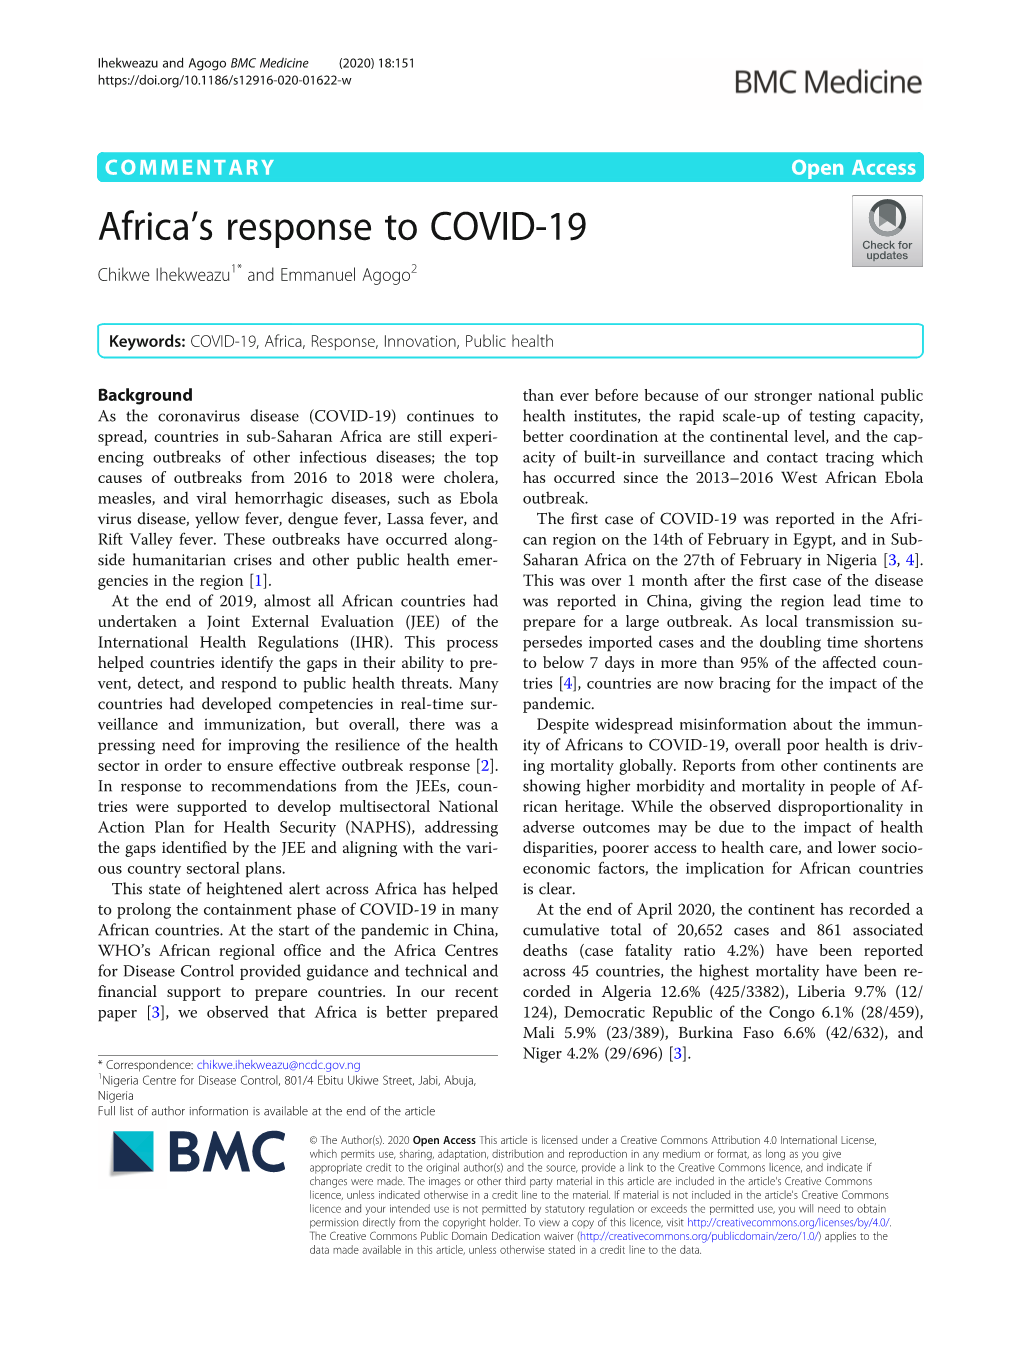 Africa's Response to COVID-19